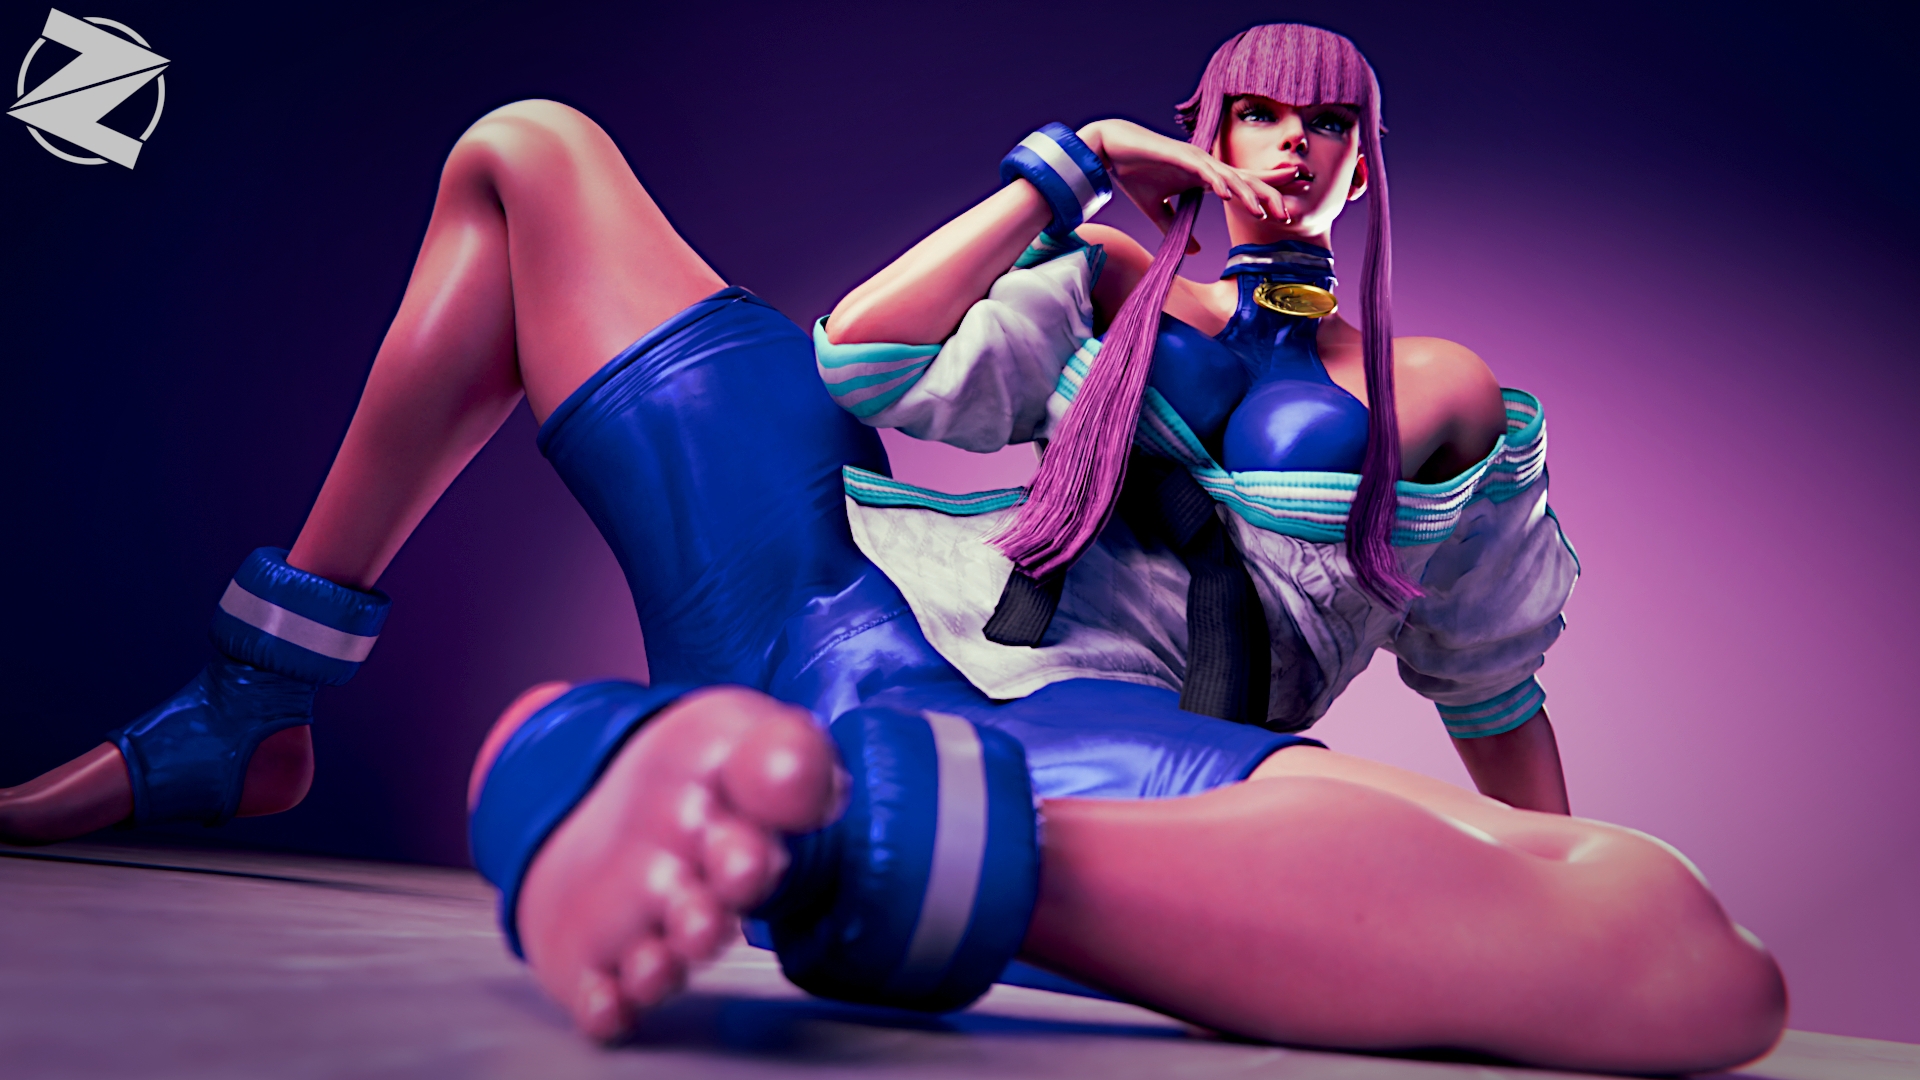  Manon March   Manon Street Fighter Street Fighter 6 Pinup